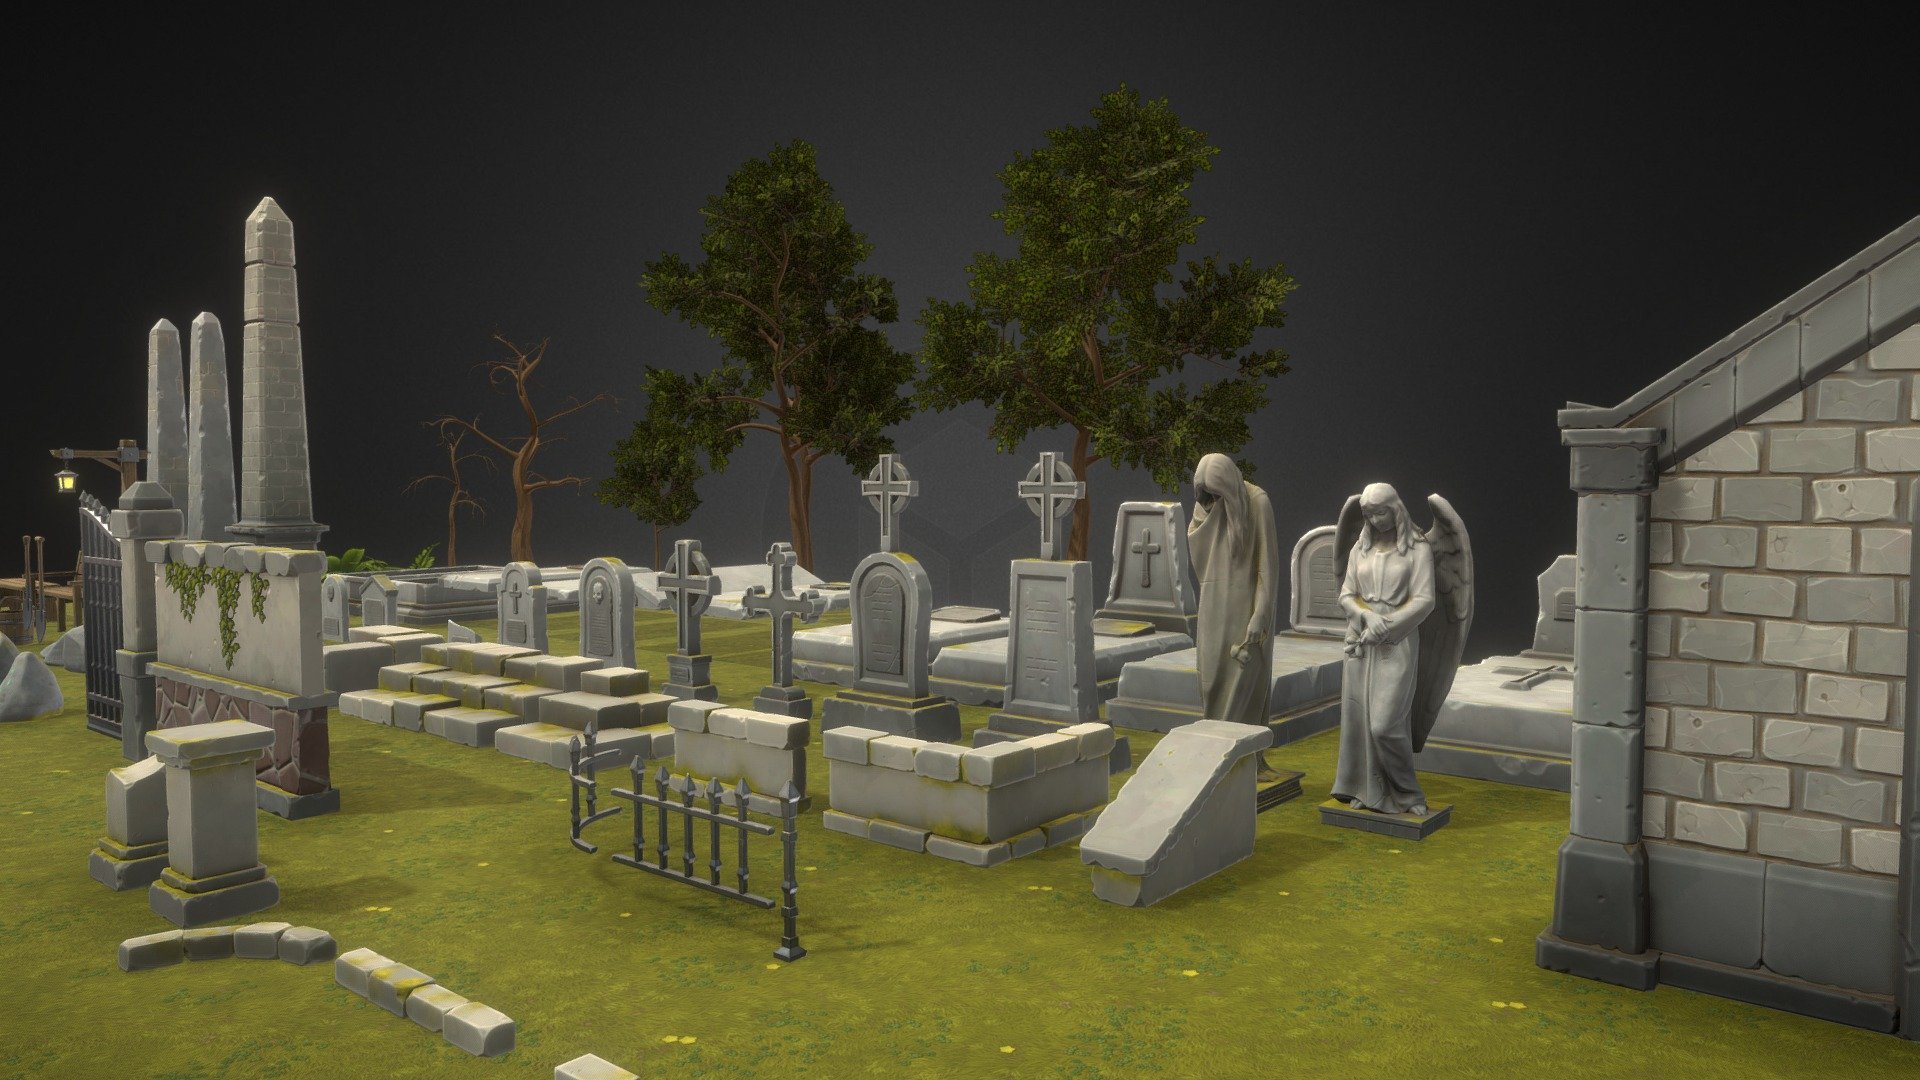 Full environment Stylized Graveyard made in unity.
The project contains many objects from which you can create a complete environment.

this is how assets look like in the Unity engine
https://youtu.be/b_rf6gv3s3A

Number of textures - 186

Texture dimensions - 2048x2048

Number of prefabs - 92

the package also contains a scene in Blender - Stylized Graveyard - Buy Royalty Free 3D model by MonarisScarlet 3d model